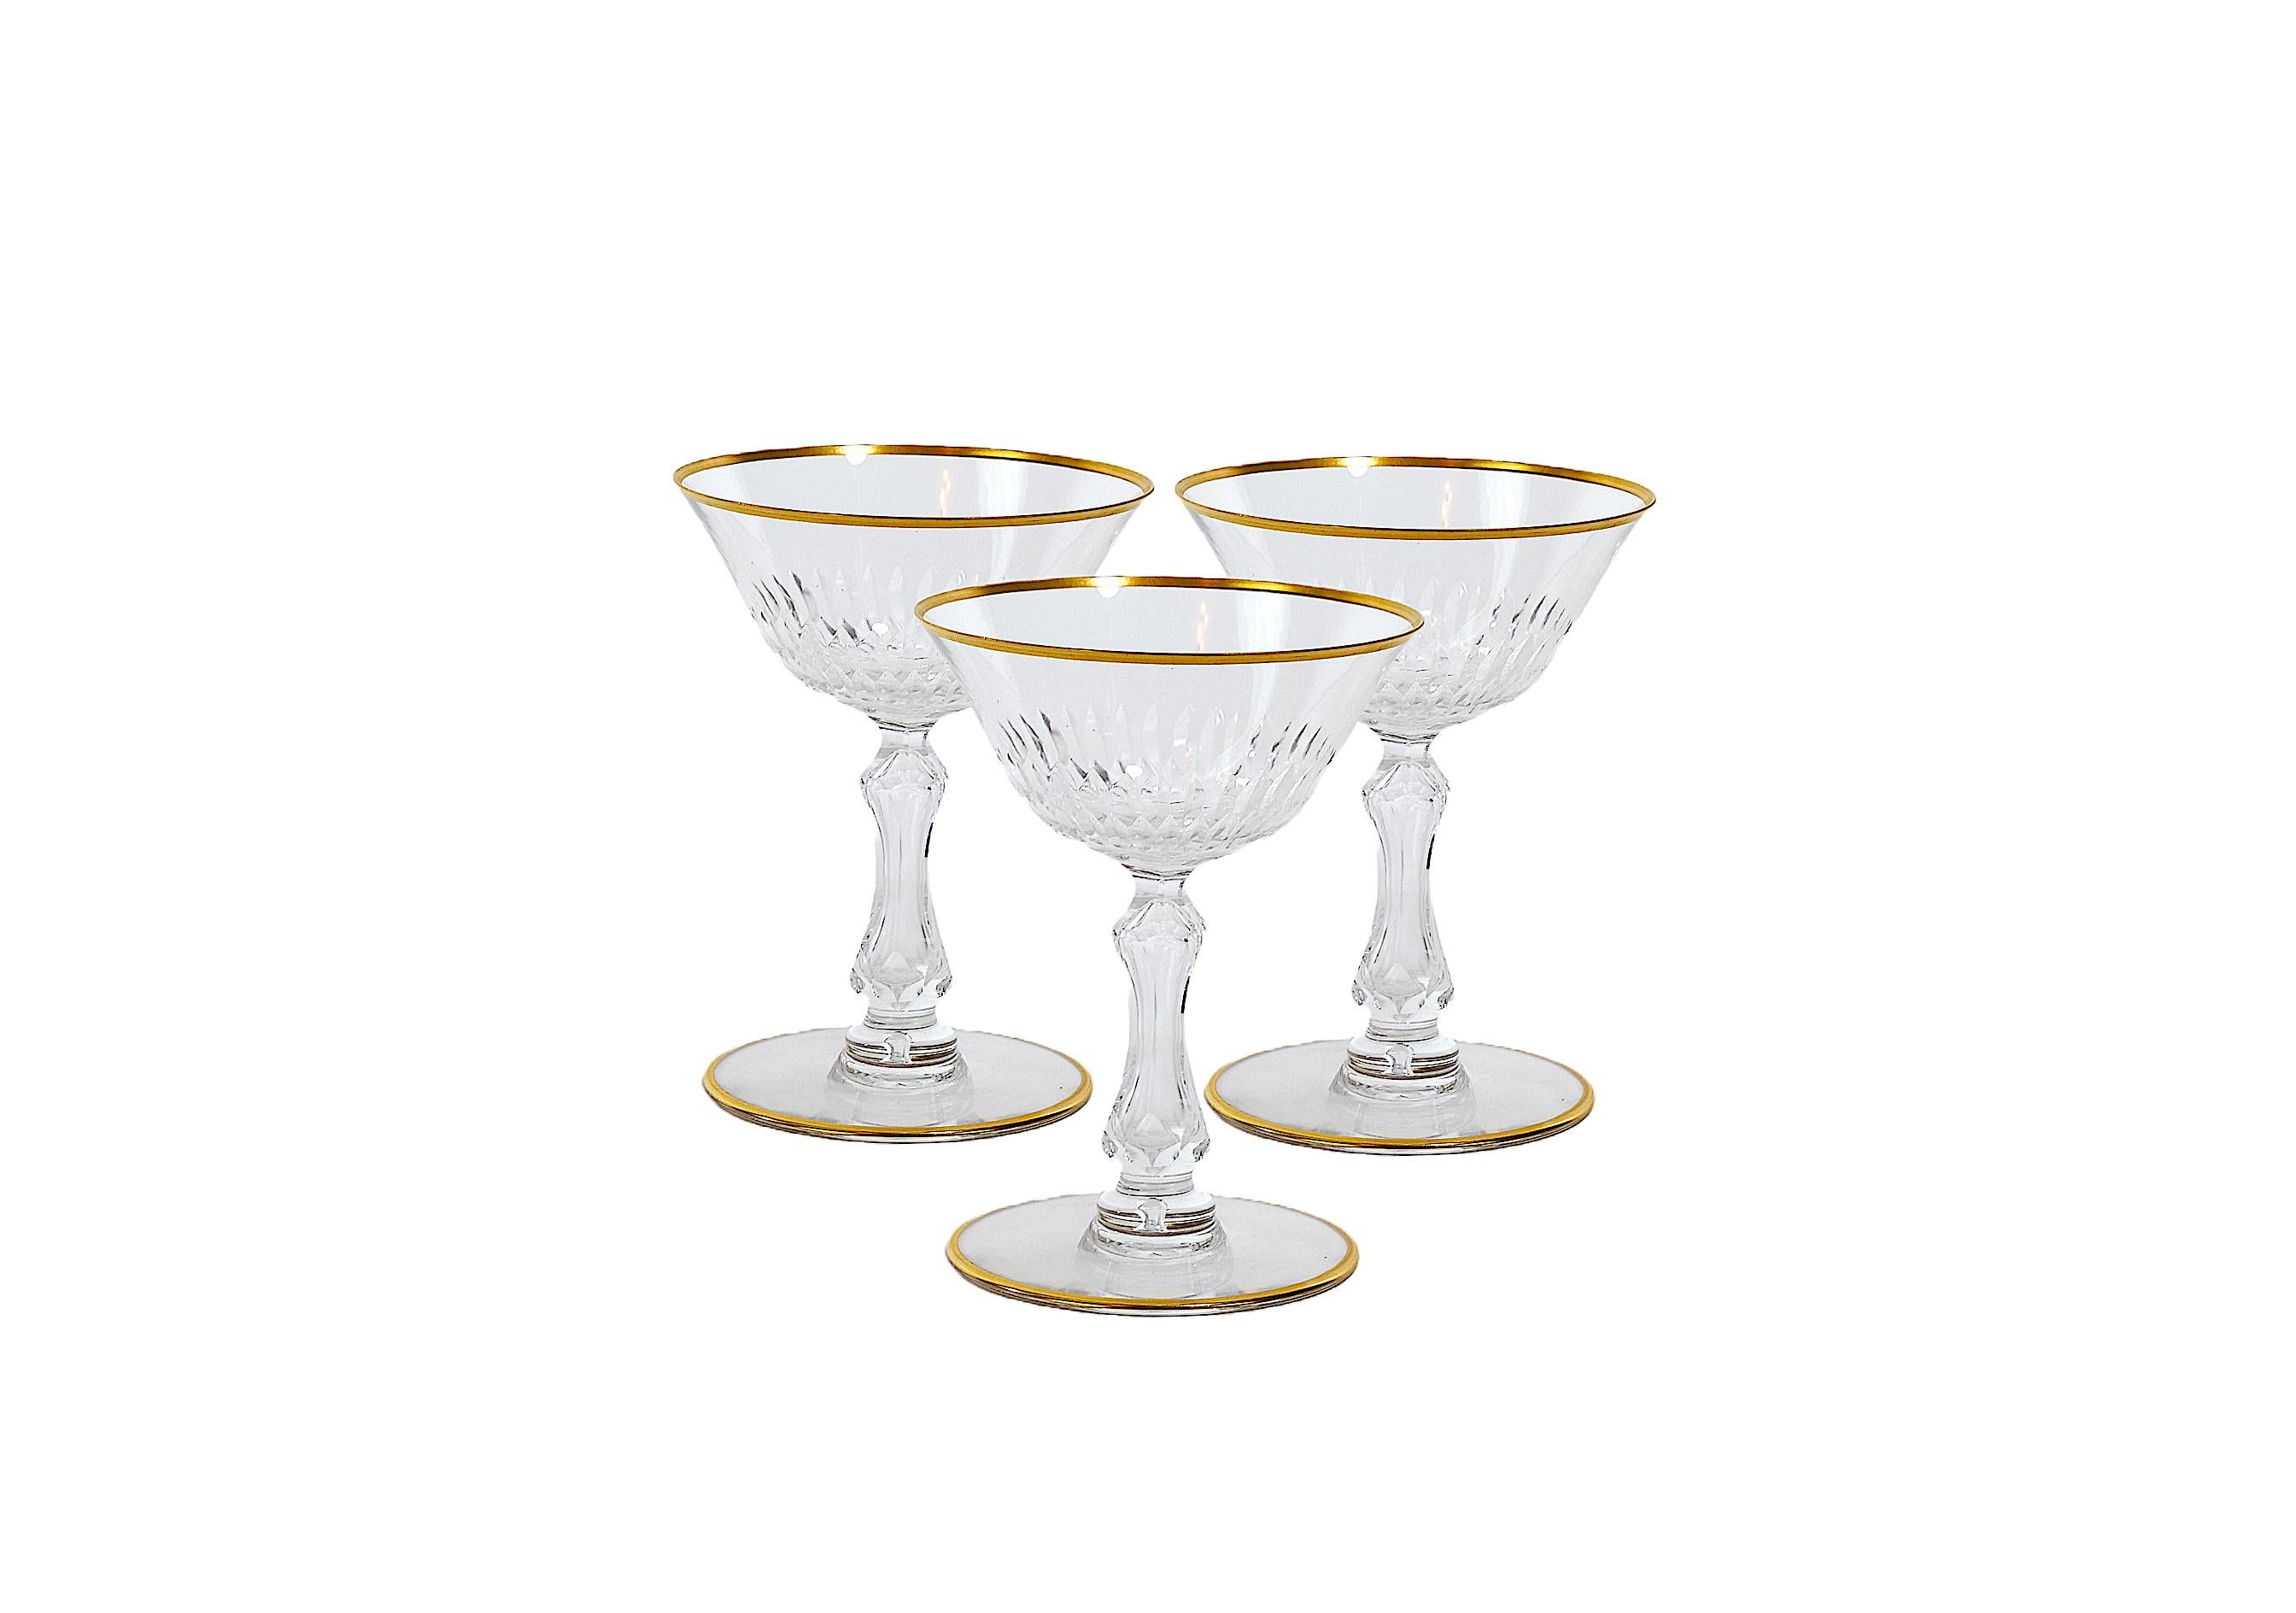 Saint Louis Crystal Gilt Gold Tableware Glassware Service / 12 People For Sale 1